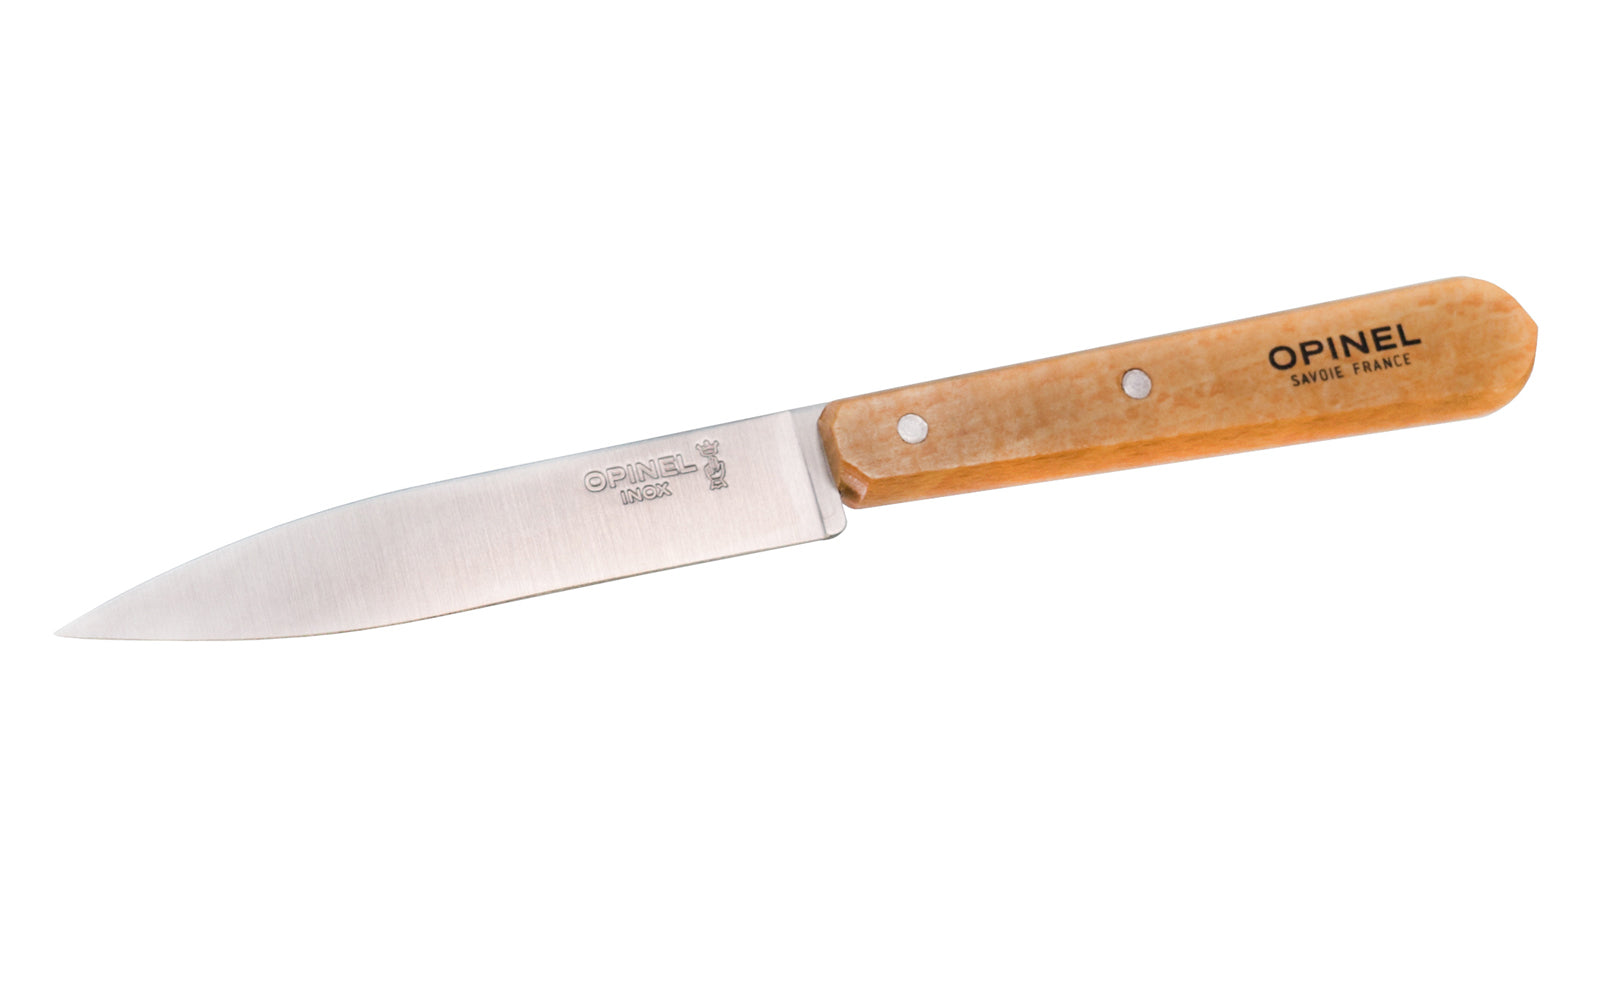 Opinel Stainless Steel Paring Knife. Model 112. Excellent for chopping & slicing up fruits & small vegetables like mushrooms, etc. The handsome Beechwood handle is varnished for beautiful look. The Opinel knife is rich in history & has been in use for over 100 years by many alike.  Made in France.